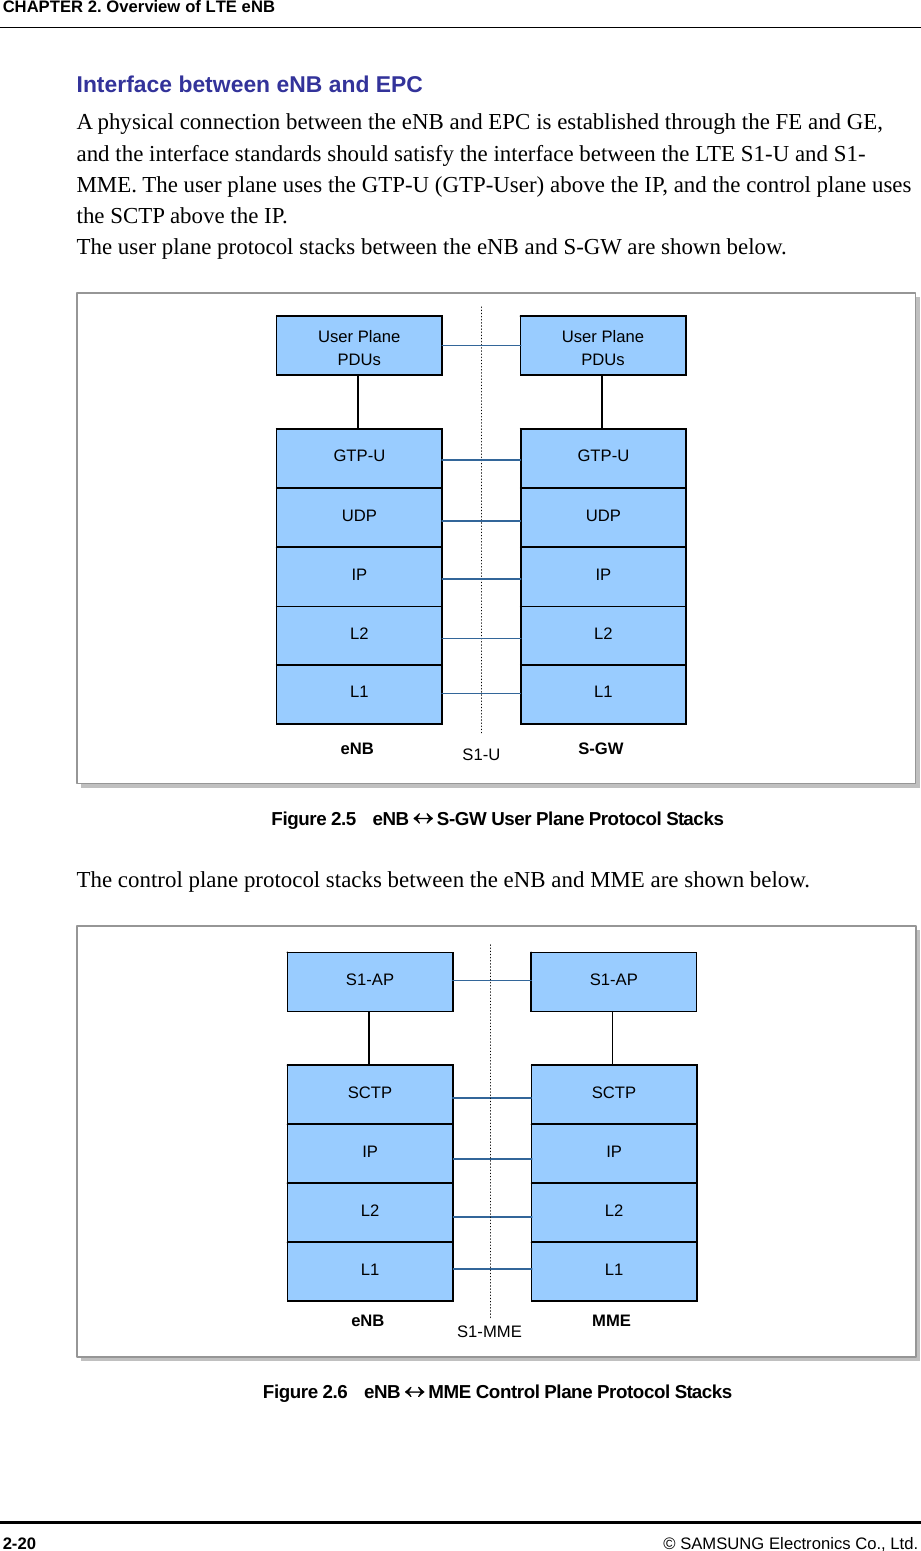 CHAPTER 2. Overview of LTE eNB Interface between eNB and EPC A physical connection between the eNB and EPC is established through the FE and GE, and the interface standards should satisfy the interface between the LTE S1-U and S1-MME. The user plane uses the GTP-U (GTP-User) above the IP, and the control plane uses the SCTP above the IP.   The user plane protocol stacks between the eNB and S-GW are shown below.    eNB UDP IP L2 L1 S-GW S1-U UDP IP L2 L1 GTP-U  GTP-U User Plane PDUsUser Plane PDUsFigure 2.5    eNB S-GW User Plane Protocol Stacks  The control plane protocol stacks between the eNB and MME are shown below.  eNB IP L2 L1 MME IP L2 L1 SCTP  SCTP S1-MME S1-AP S1-AP Figure 2.6    eNB MME Control Plane Protocol Stacks  2-20 © SAMSUNG Electronics Co., Ltd. 